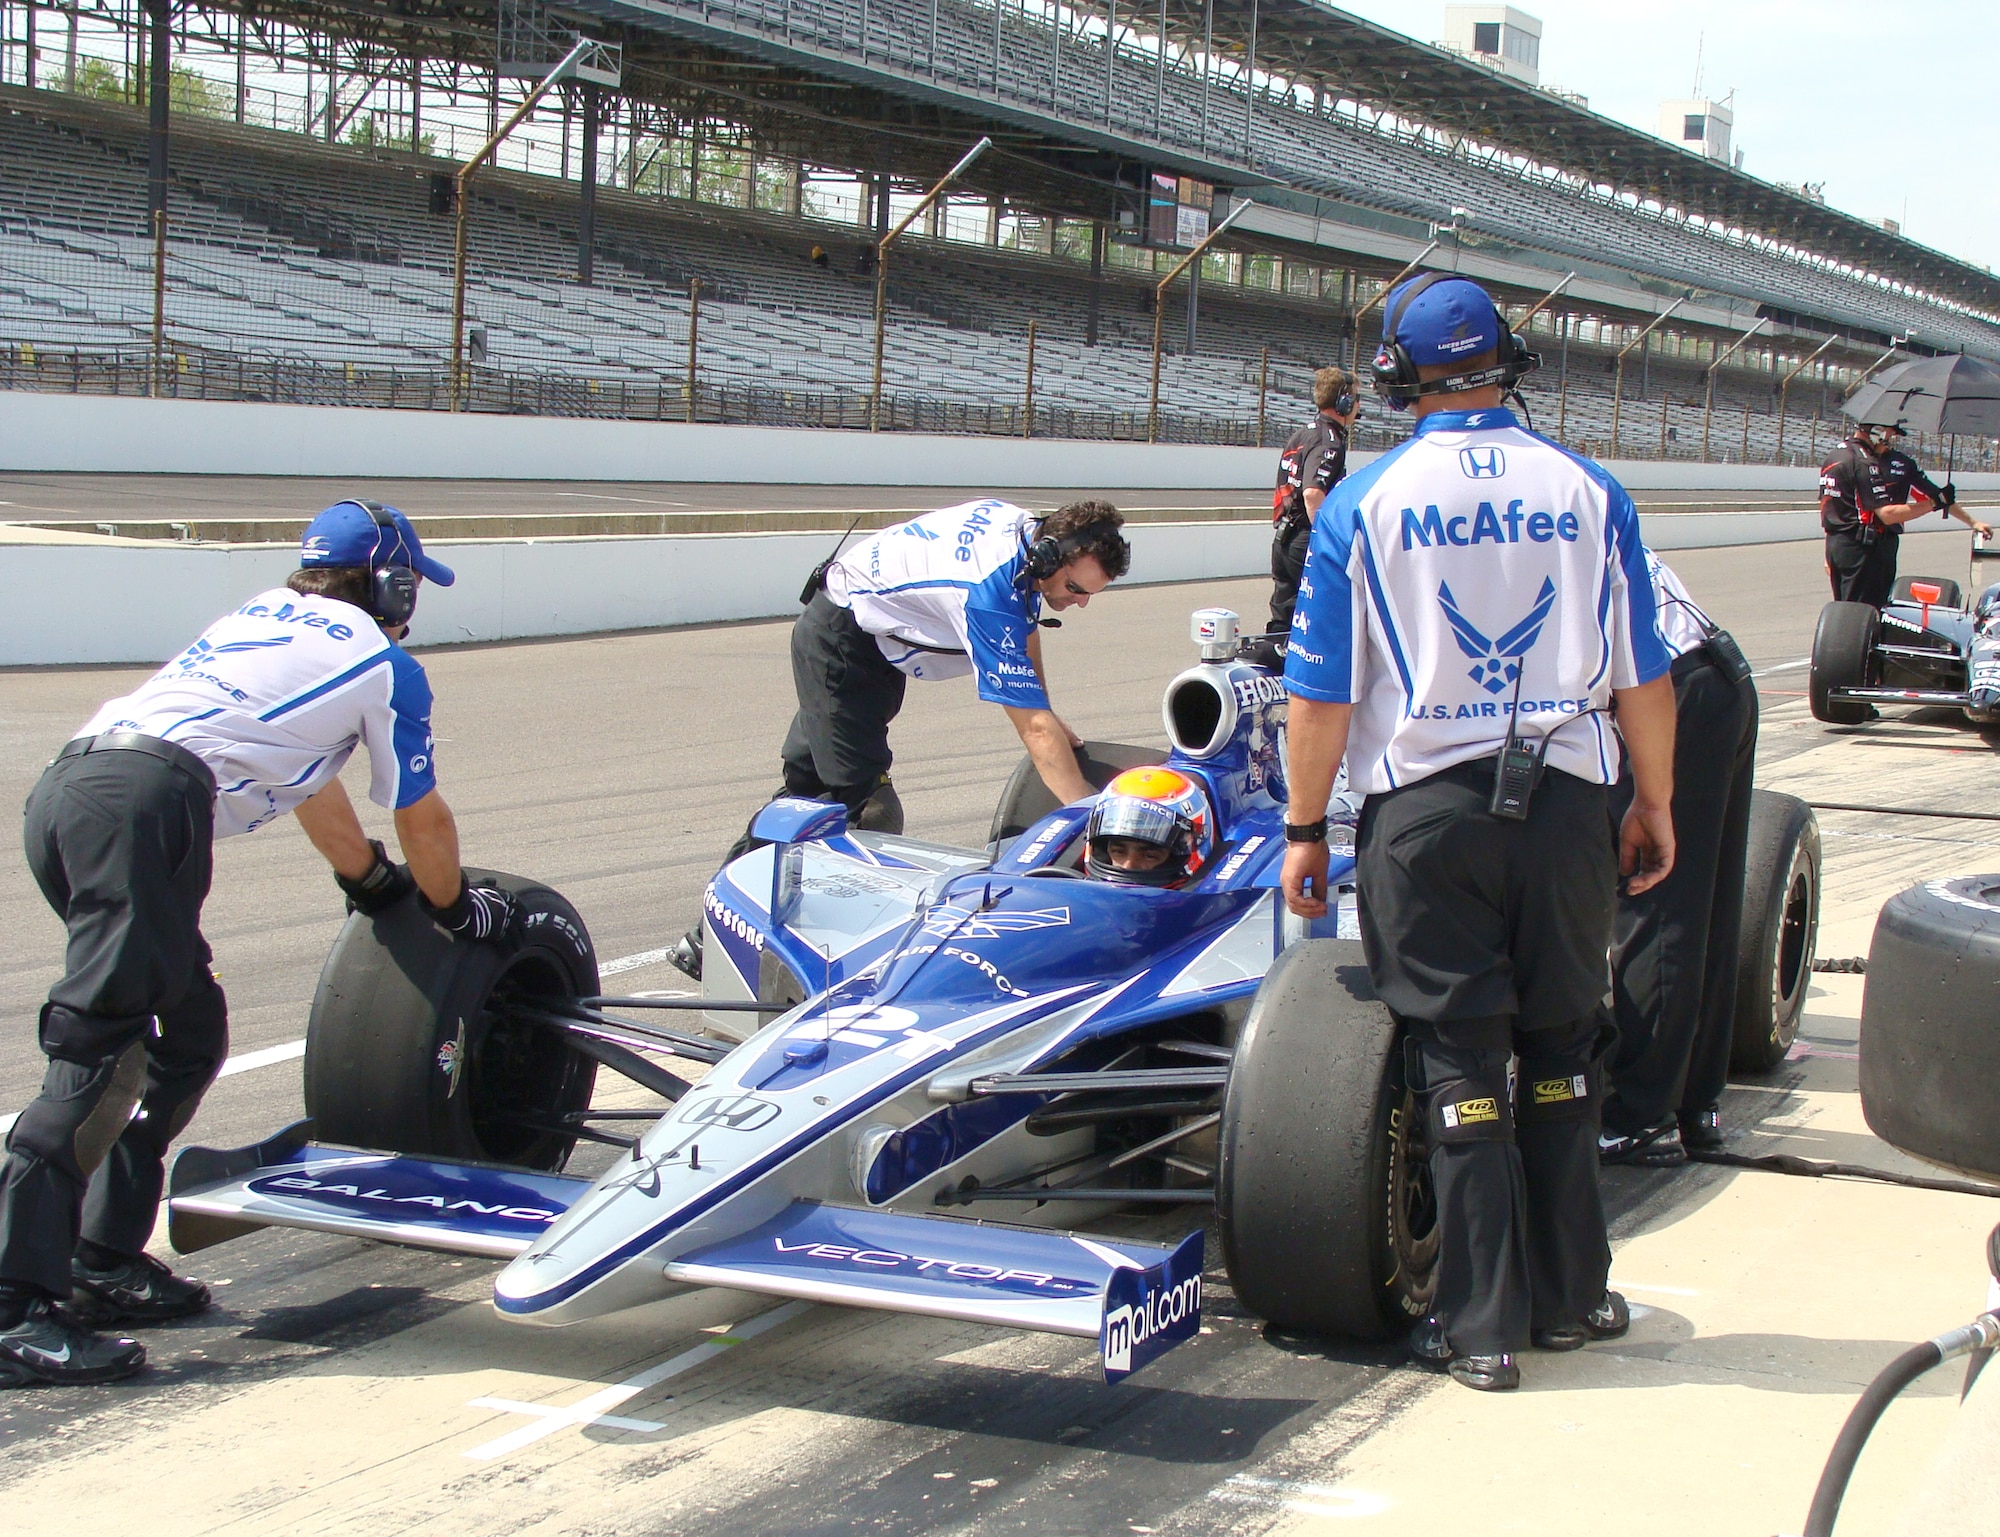 The Luczo Dragon Racing team completes a pit stop during practice by No. 2 car driver Rafael Matos May 16 at the Indianapolis Motor Speedway. Matos is driving the Air Force-themed Indy car in the Indianapolis 500 May 24 after qualifying 12th with the fastest time of five rookies in the field. (U.S. Air Force photo/Daniel Elkins) 